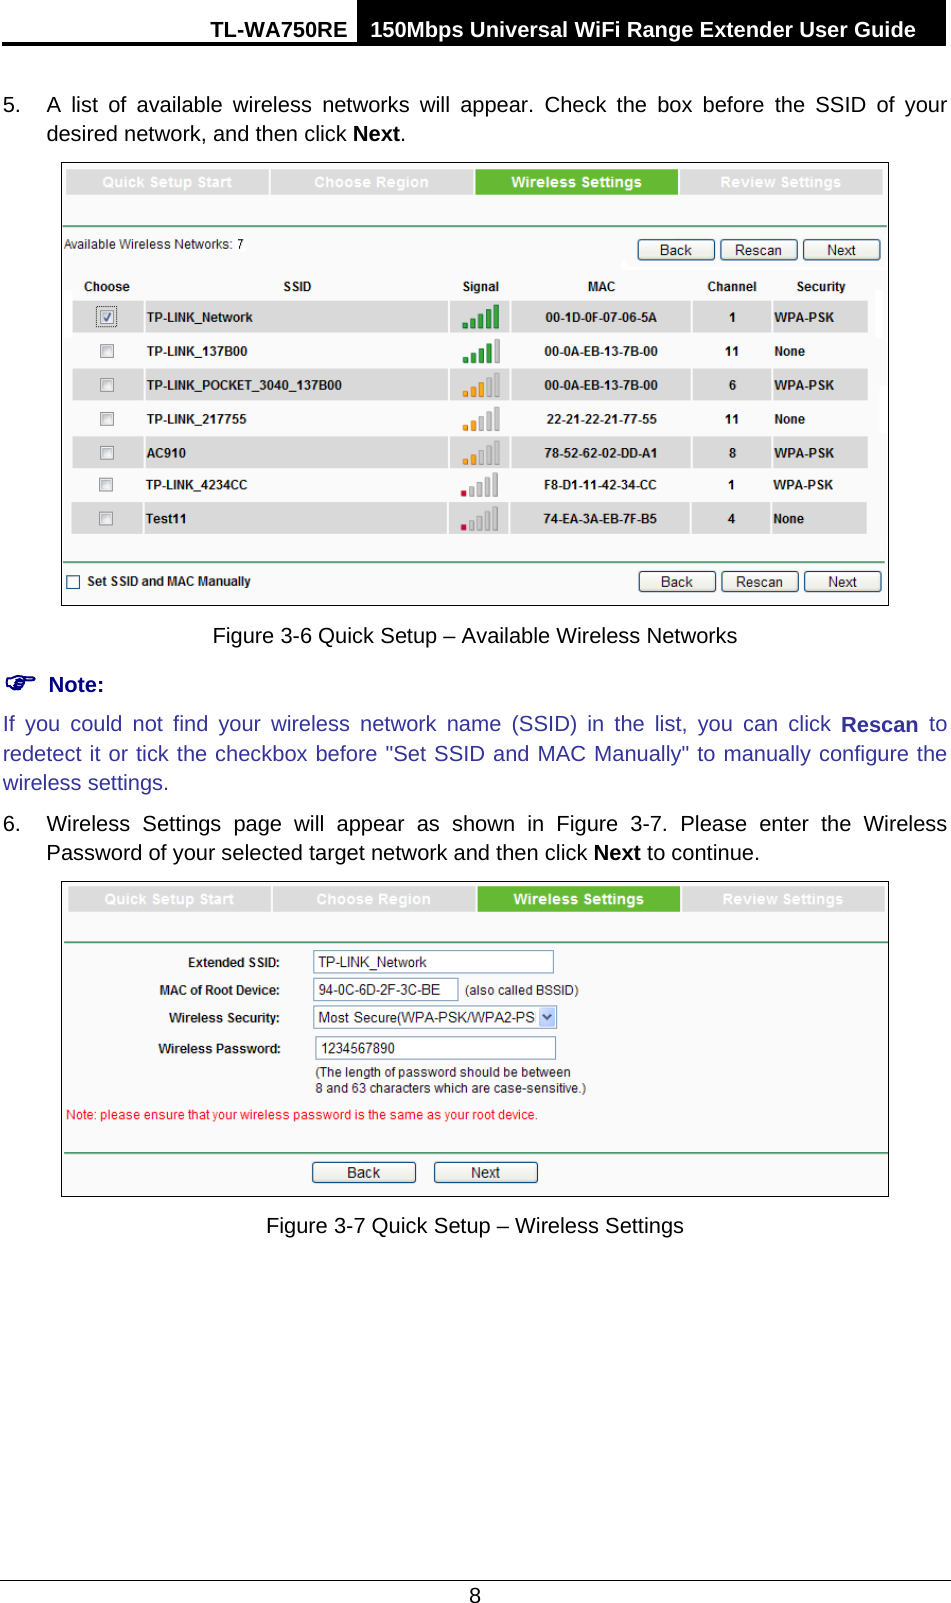 TL-WA750RE 150Mbps Universal WiFi Range Extender User Guide  8 5. A list of available wireless networks  will appear. Check the box before the SSID of your desired network, and then click Next.    Figure 3-6 Quick Setup – Available Wireless Networks  Note: If you could not find your wireless network name (SSID) in the list, you can click Rescan to redetect it or tick the checkbox before &quot;Set SSID and MAC Manually&quot; to manually configure the wireless settings. 6. Wireless Settings page will appear as shown in Figure  3-7. Please enter the Wireless Password of your selected target network and then click Next to continue.  Figure 3-7 Quick Setup – Wireless Settings 